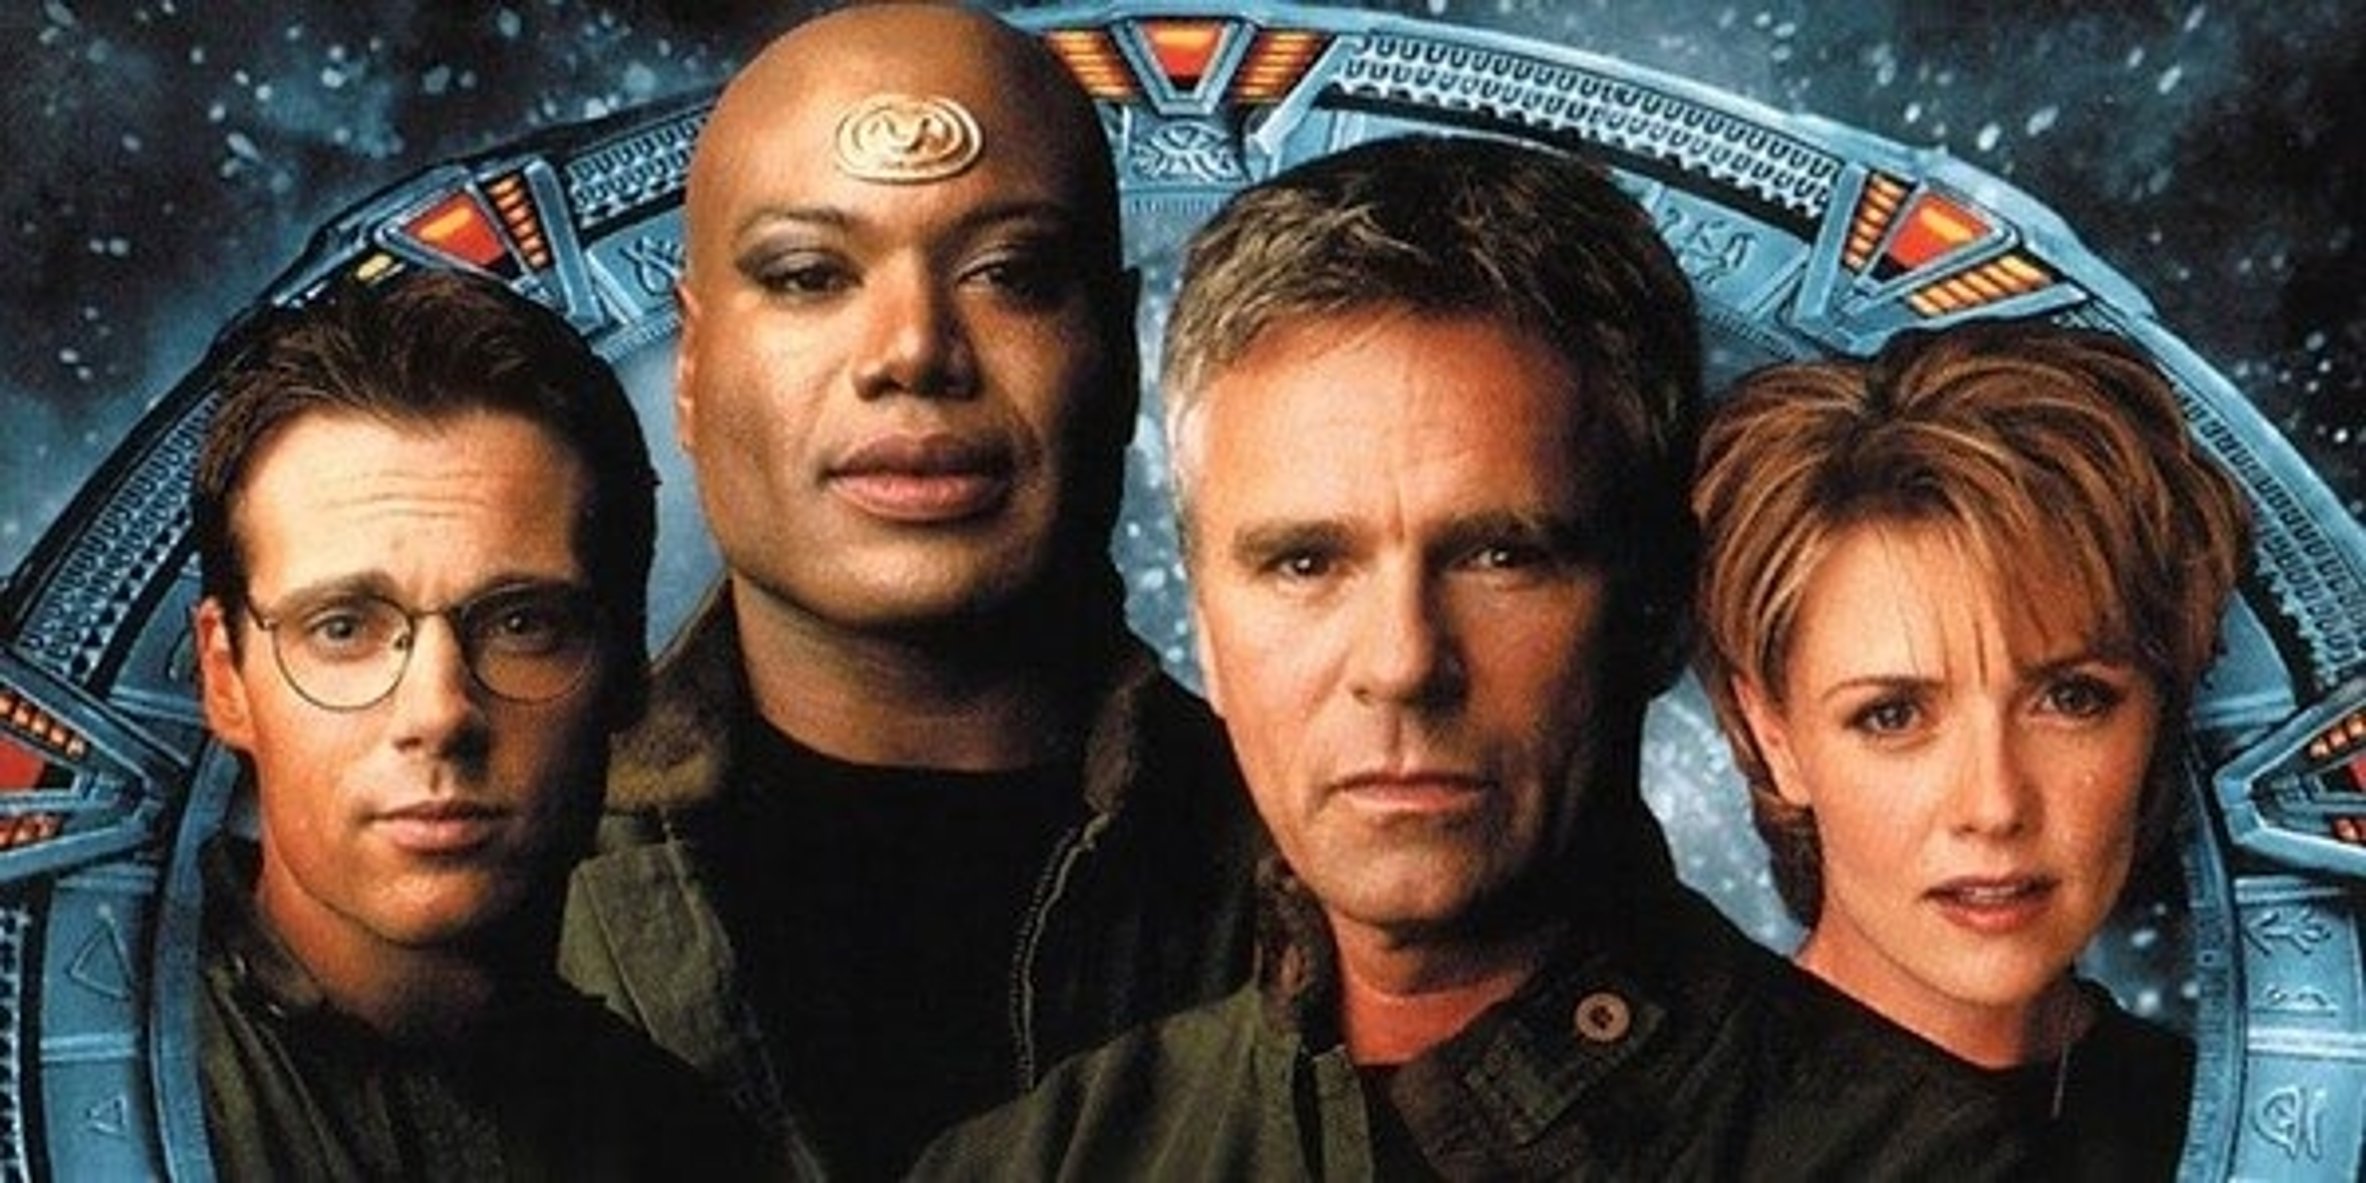 Stargate SG-1’s Christopher Judge Reveals The Advice He Would Give To Those Working On A New Series